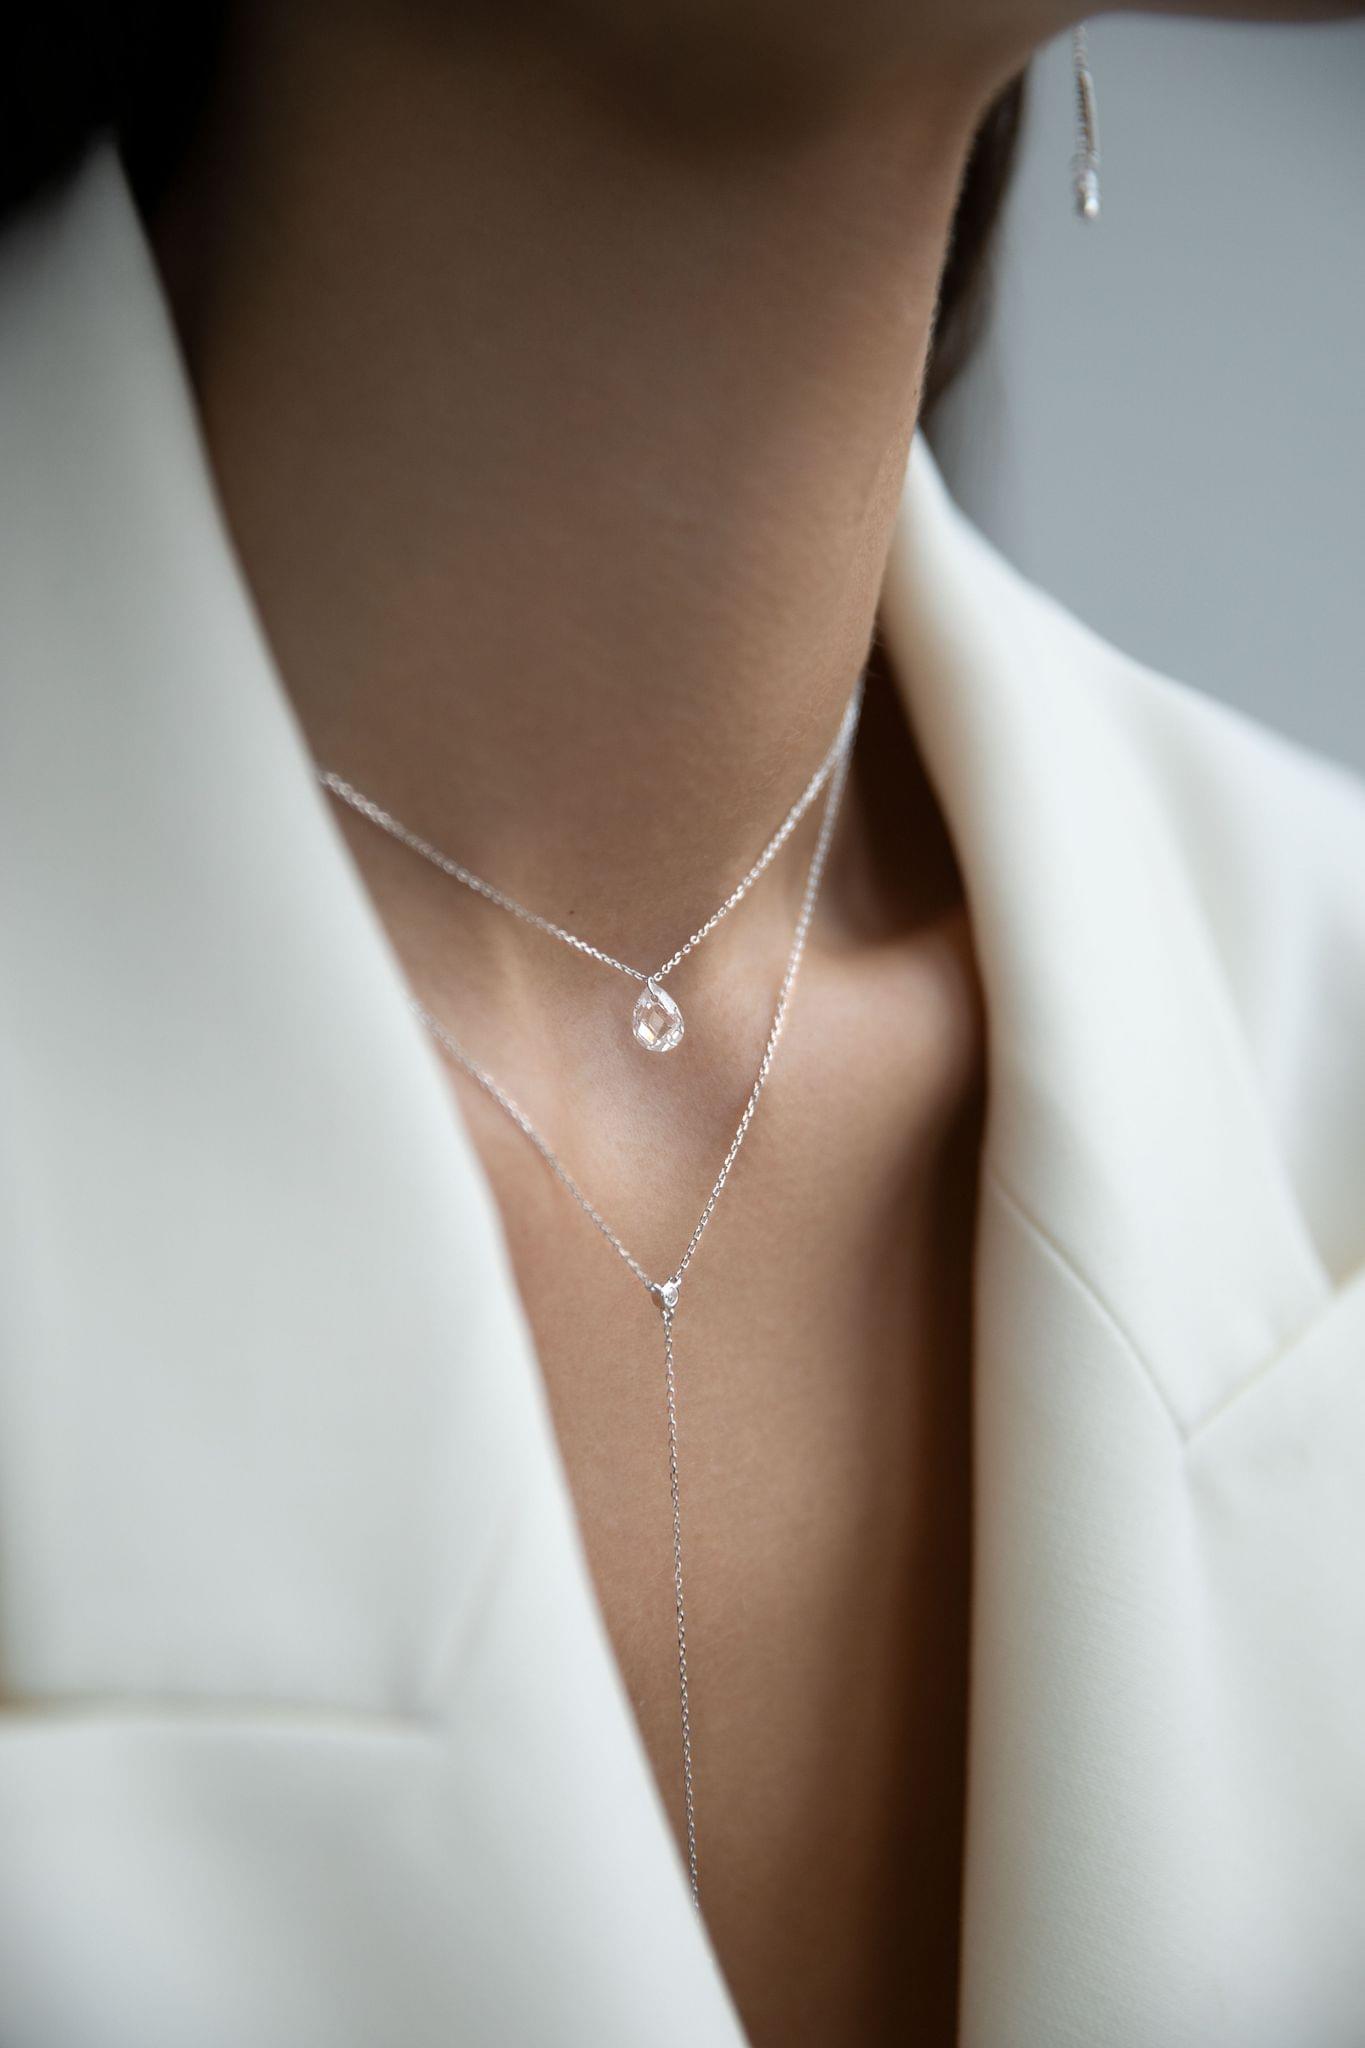 Women's Classic and Thin Lariat Necklace - P001